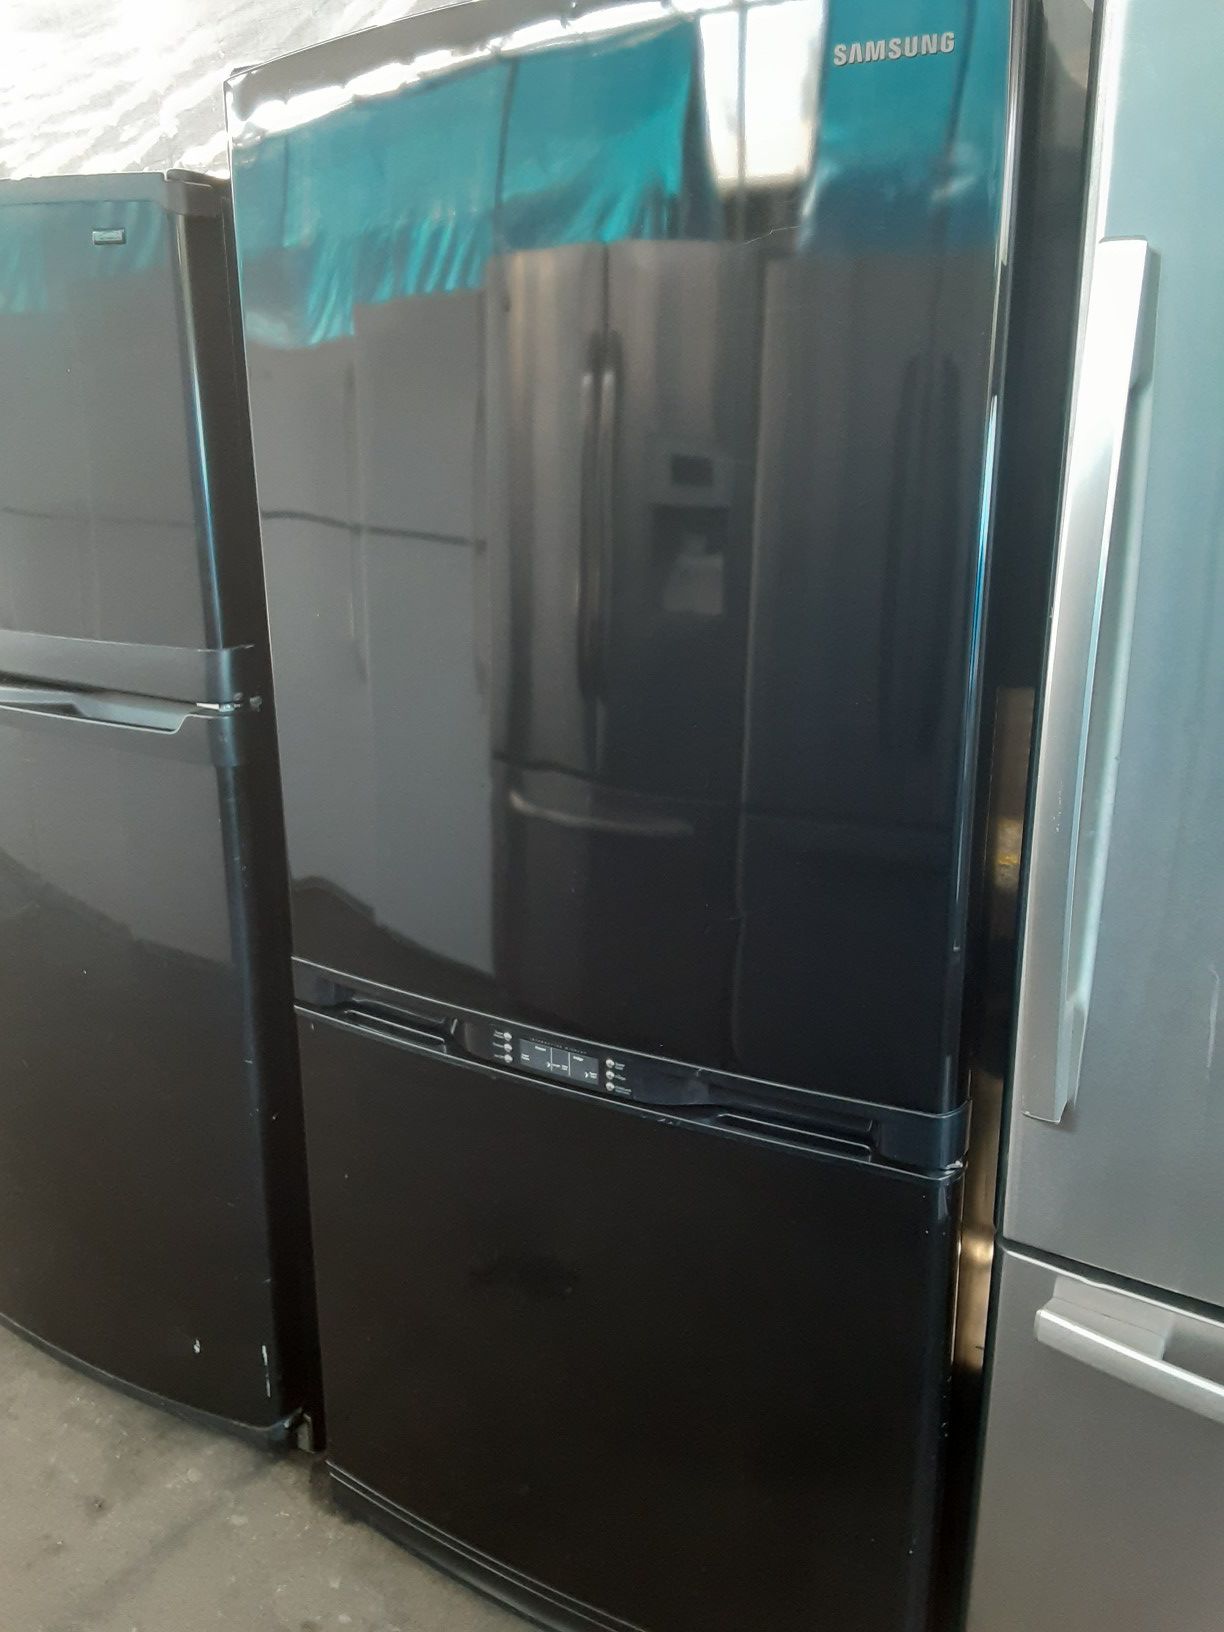 $399 Samsung black gloss finish bottom freezer fridge includes delivery in the San Fernando Valley a warranty and installation